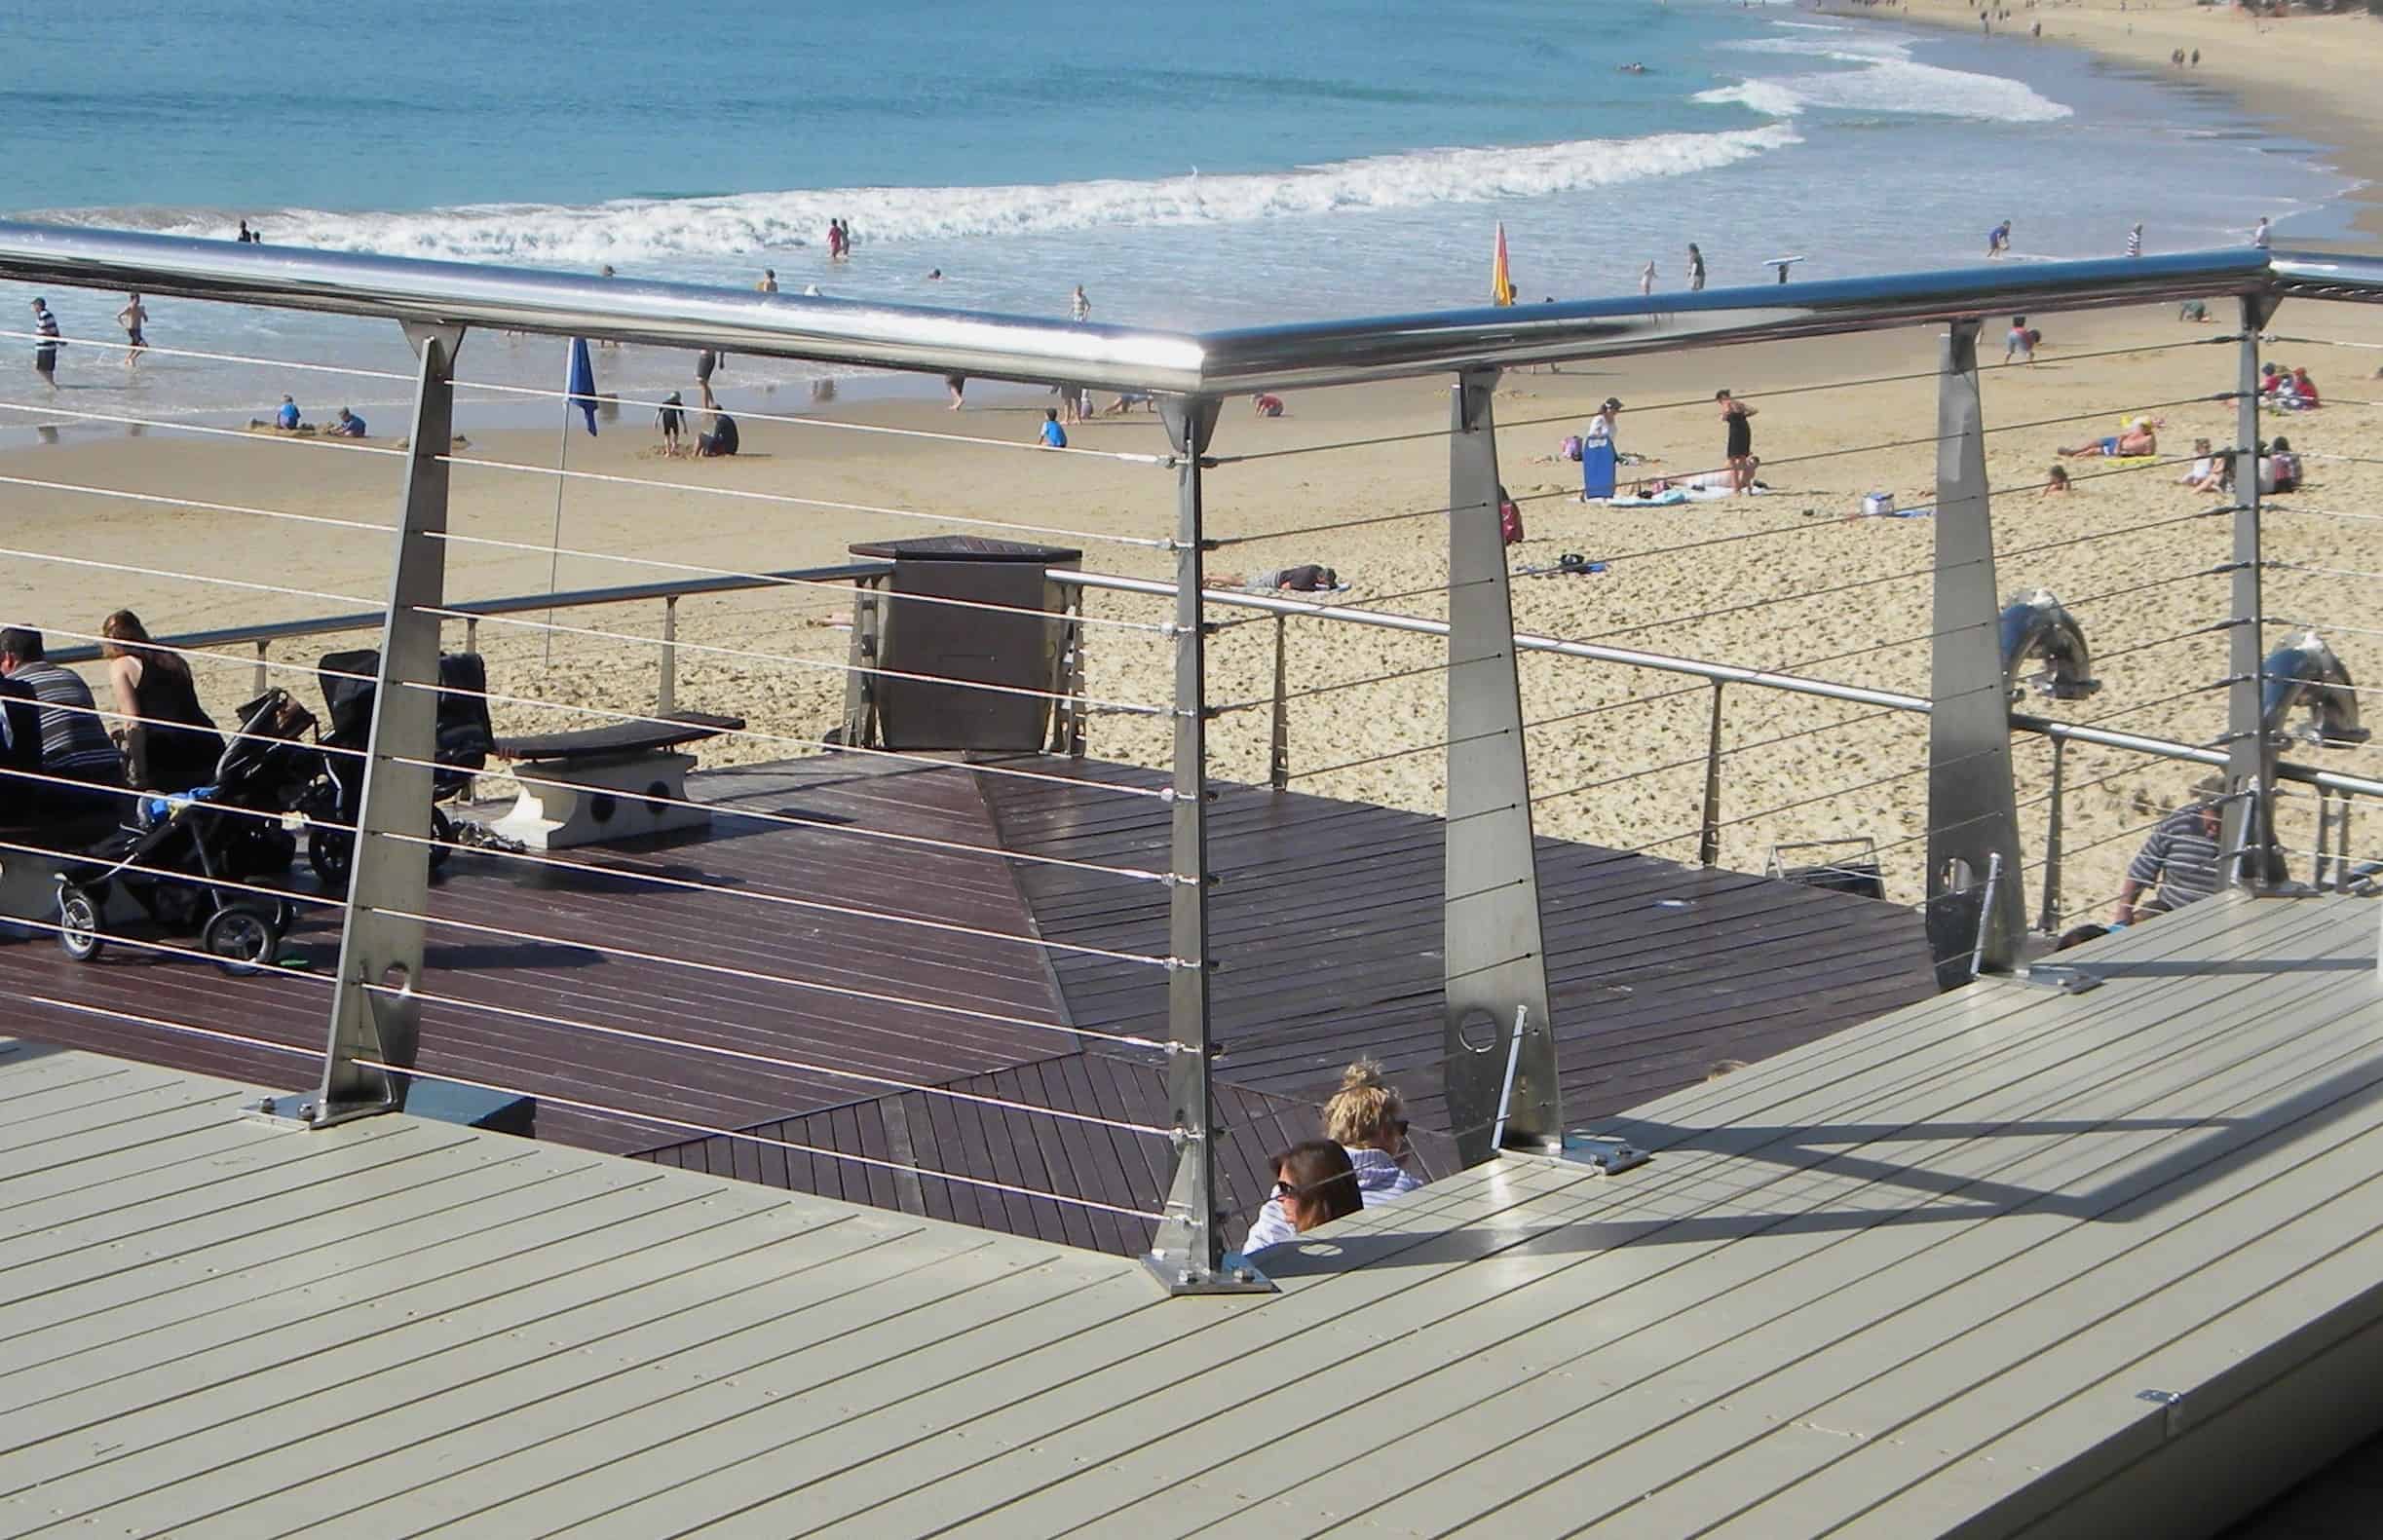 Stainless steel balustrade - Mooloolaba Loo with a View viewing platform